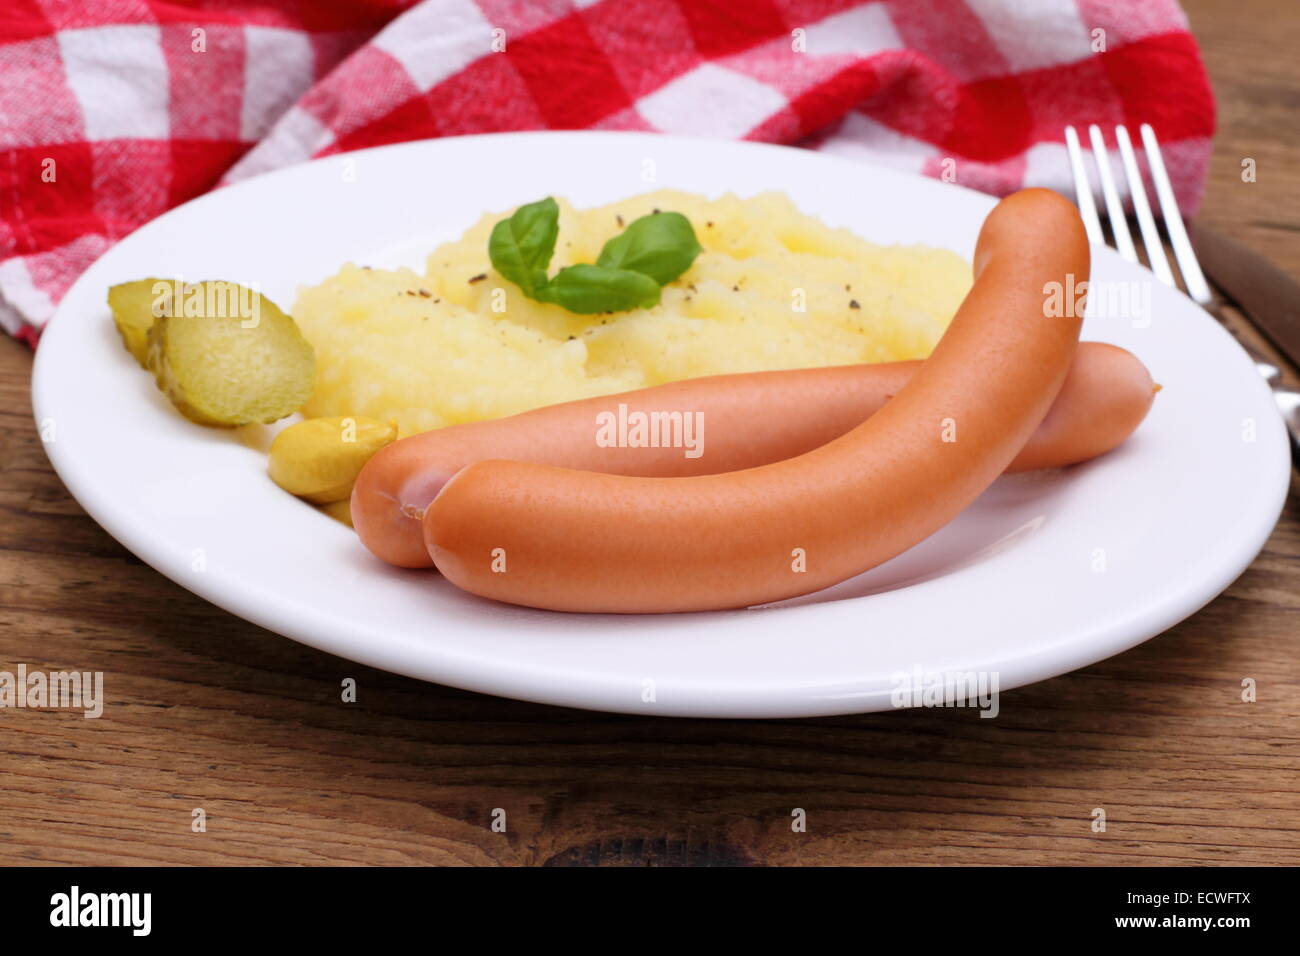 Wiener sausage with mashed potatoes, mustard, close up Stock Photo - Alamy